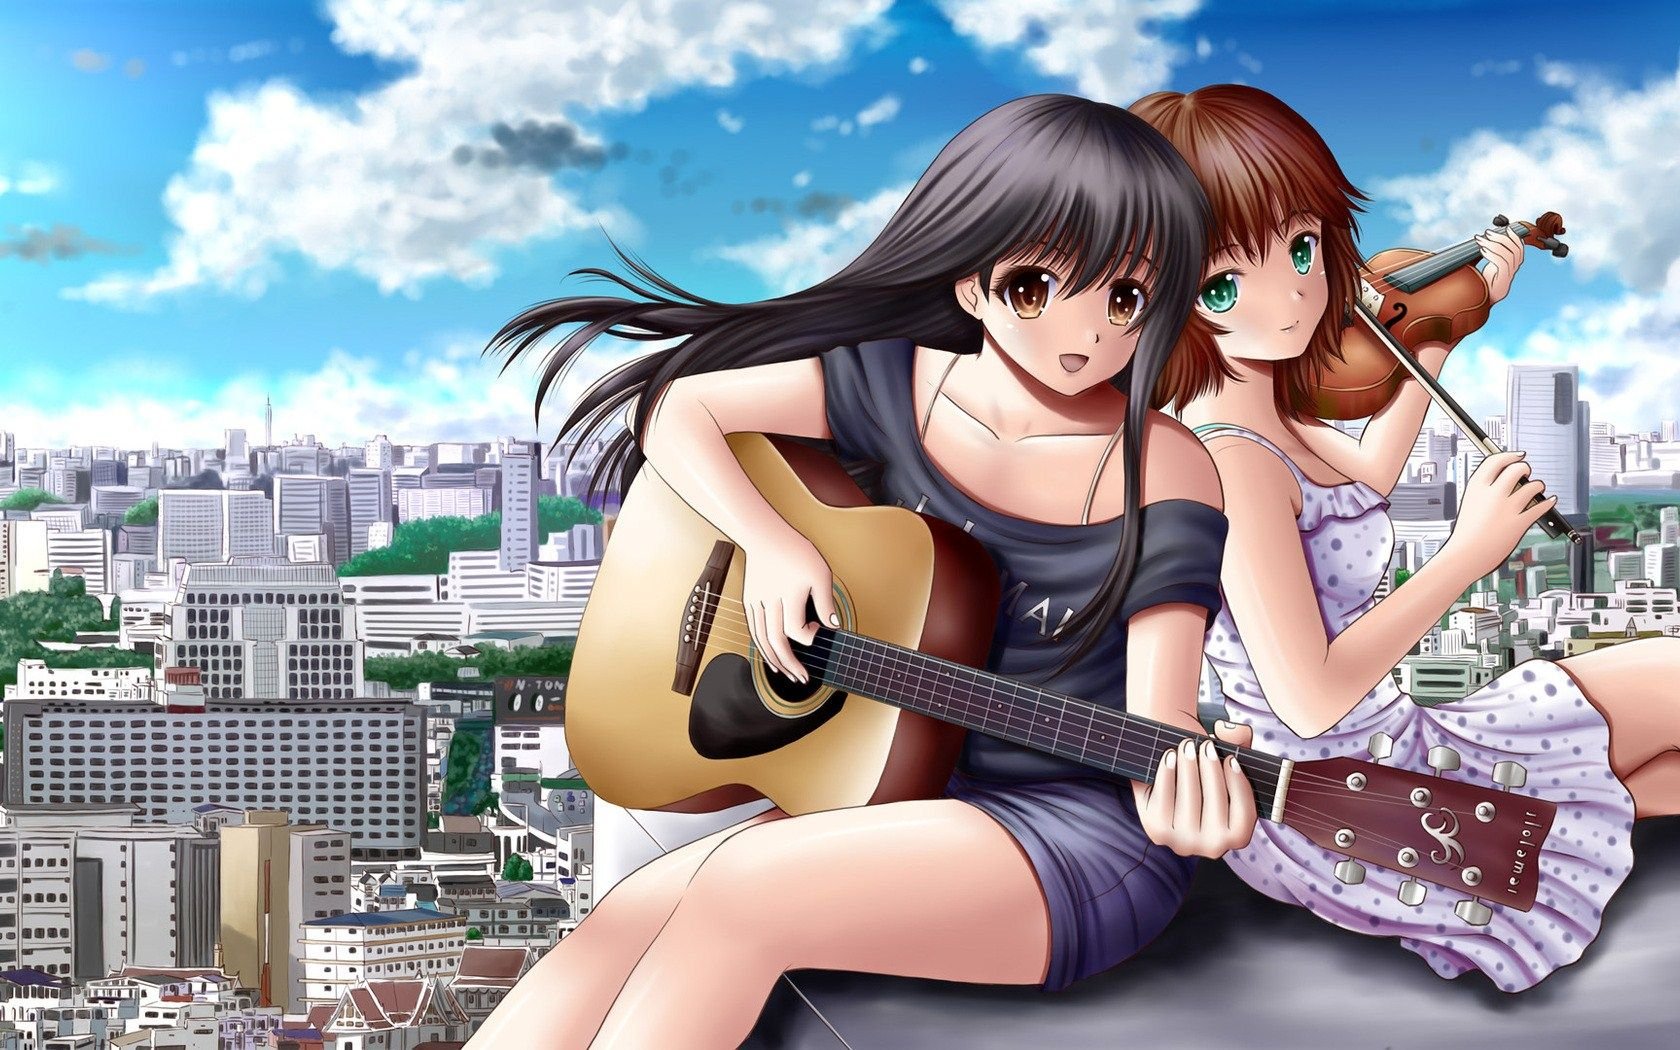 anime, Girls, Brown, And, Black, Hair, Green, And, Brown, Eyes, Play, Guitar, And, Violin Wallpaper